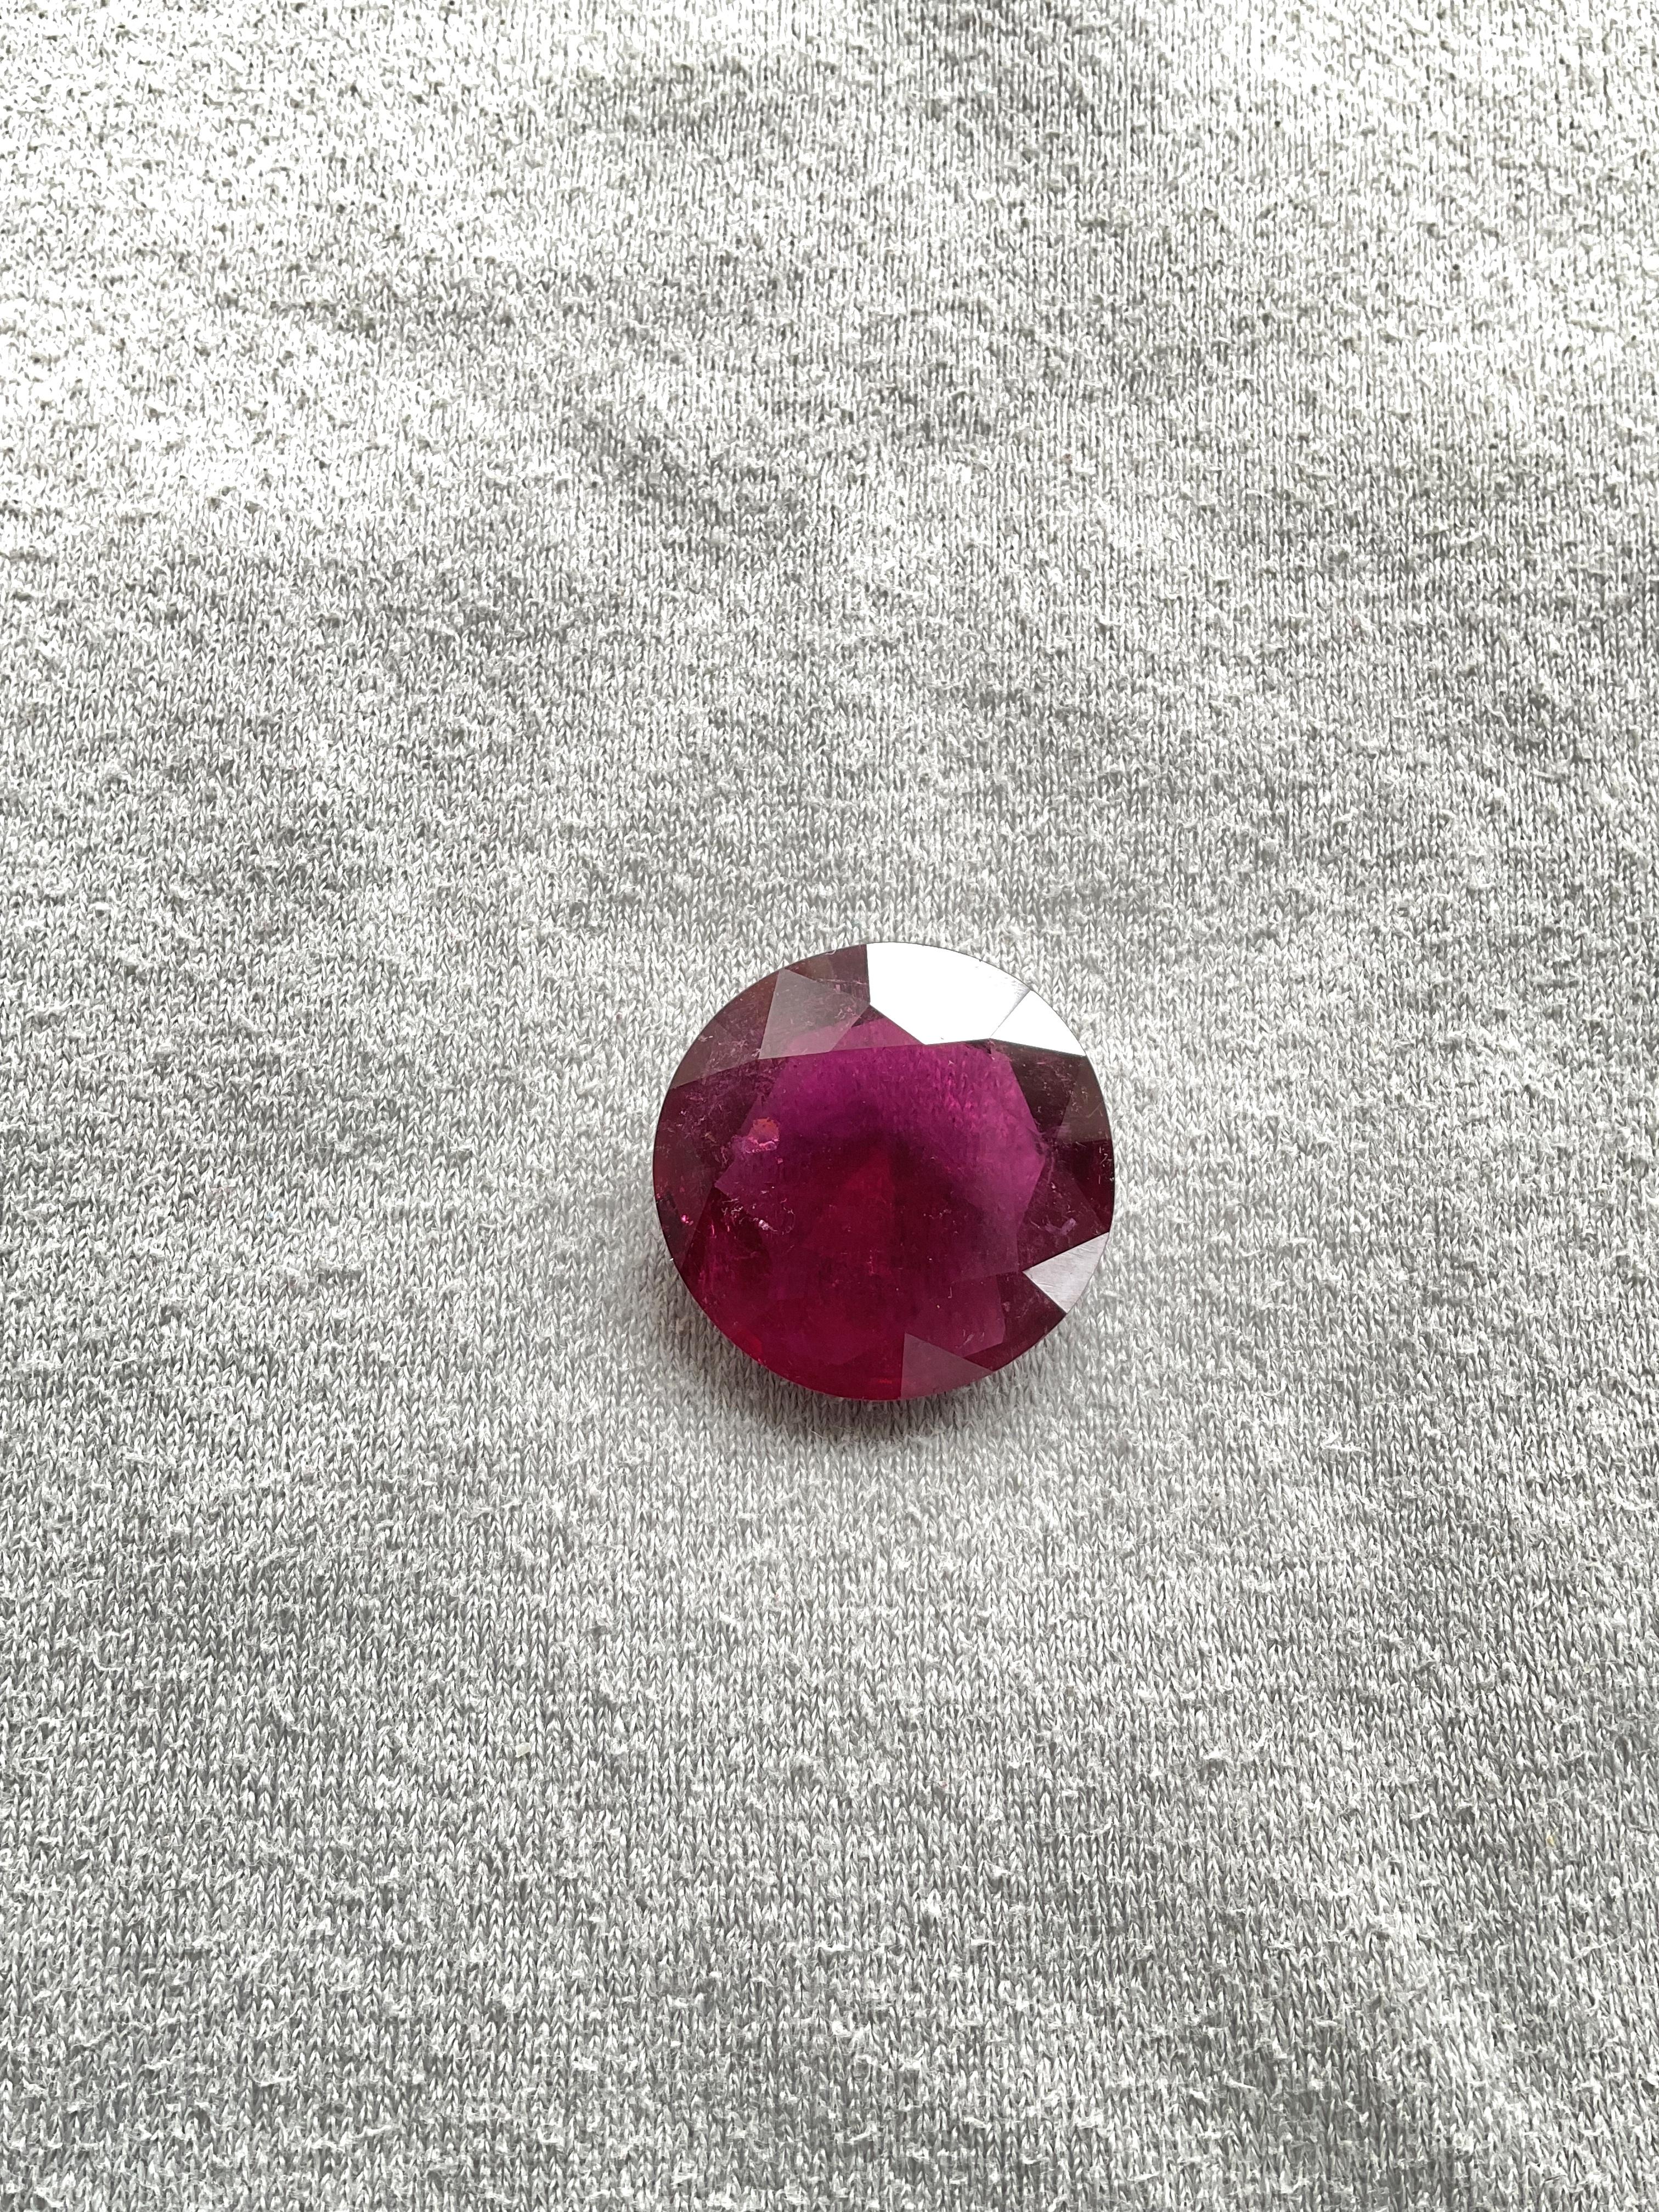 26.40 Carats Rubellite Tourmaline Round Cut Stone For Fine Jewelry Natural gem In New Condition For Sale In Jaipur, RJ